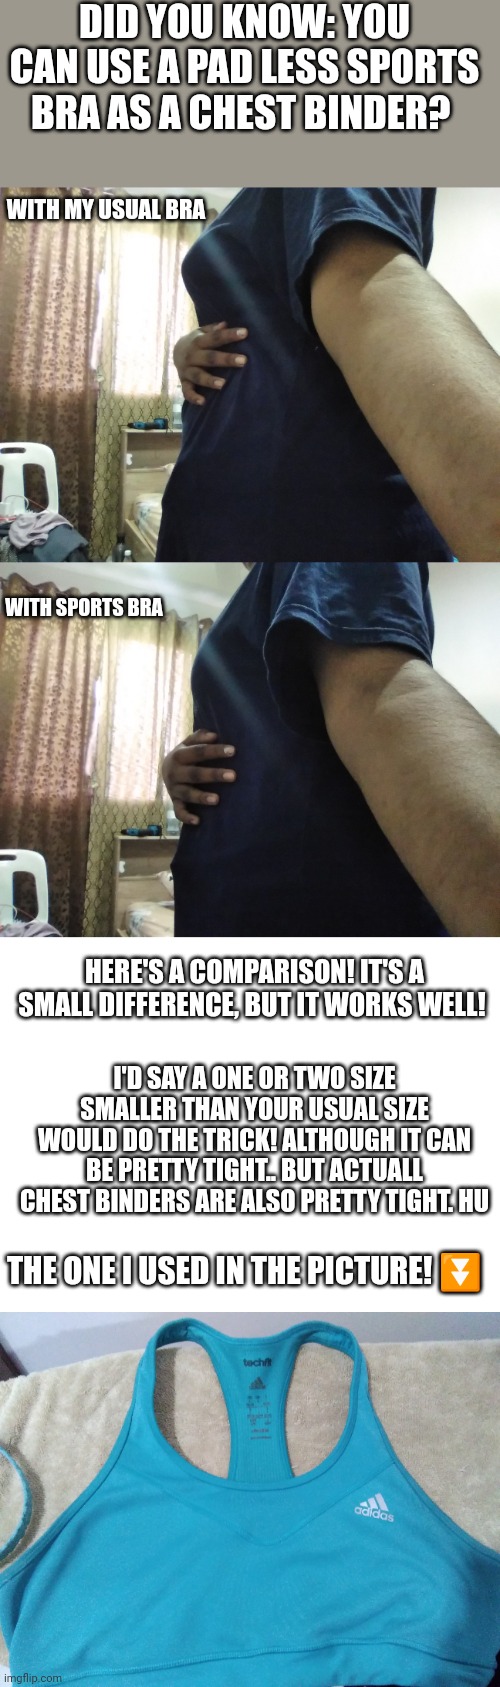 To anyone that cant buy a binder or simply wants to be a little more flat!education purposes so pls don't remove it | DID YOU KNOW: YOU CAN USE A PAD LESS SPORTS BRA AS A CHEST BINDER? WITH MY USUAL BRA; WITH SPORTS BRA; HERE'S A COMPARISON! IT'S A SMALL DIFFERENCE, BUT IT WORKS WELL! I'D SAY A ONE OR TWO SIZE SMALLER THAN YOUR USUAL SIZE WOULD DO THE TRICK! ALTHOUGH IT CAN BE PRETTY TIGHT.. BUT ACTUALL CHEST BINDERS ARE ALSO PRETTY TIGHT. HU; THE ONE I USED IN THE PICTURE! ⏬ | made w/ Imgflip meme maker